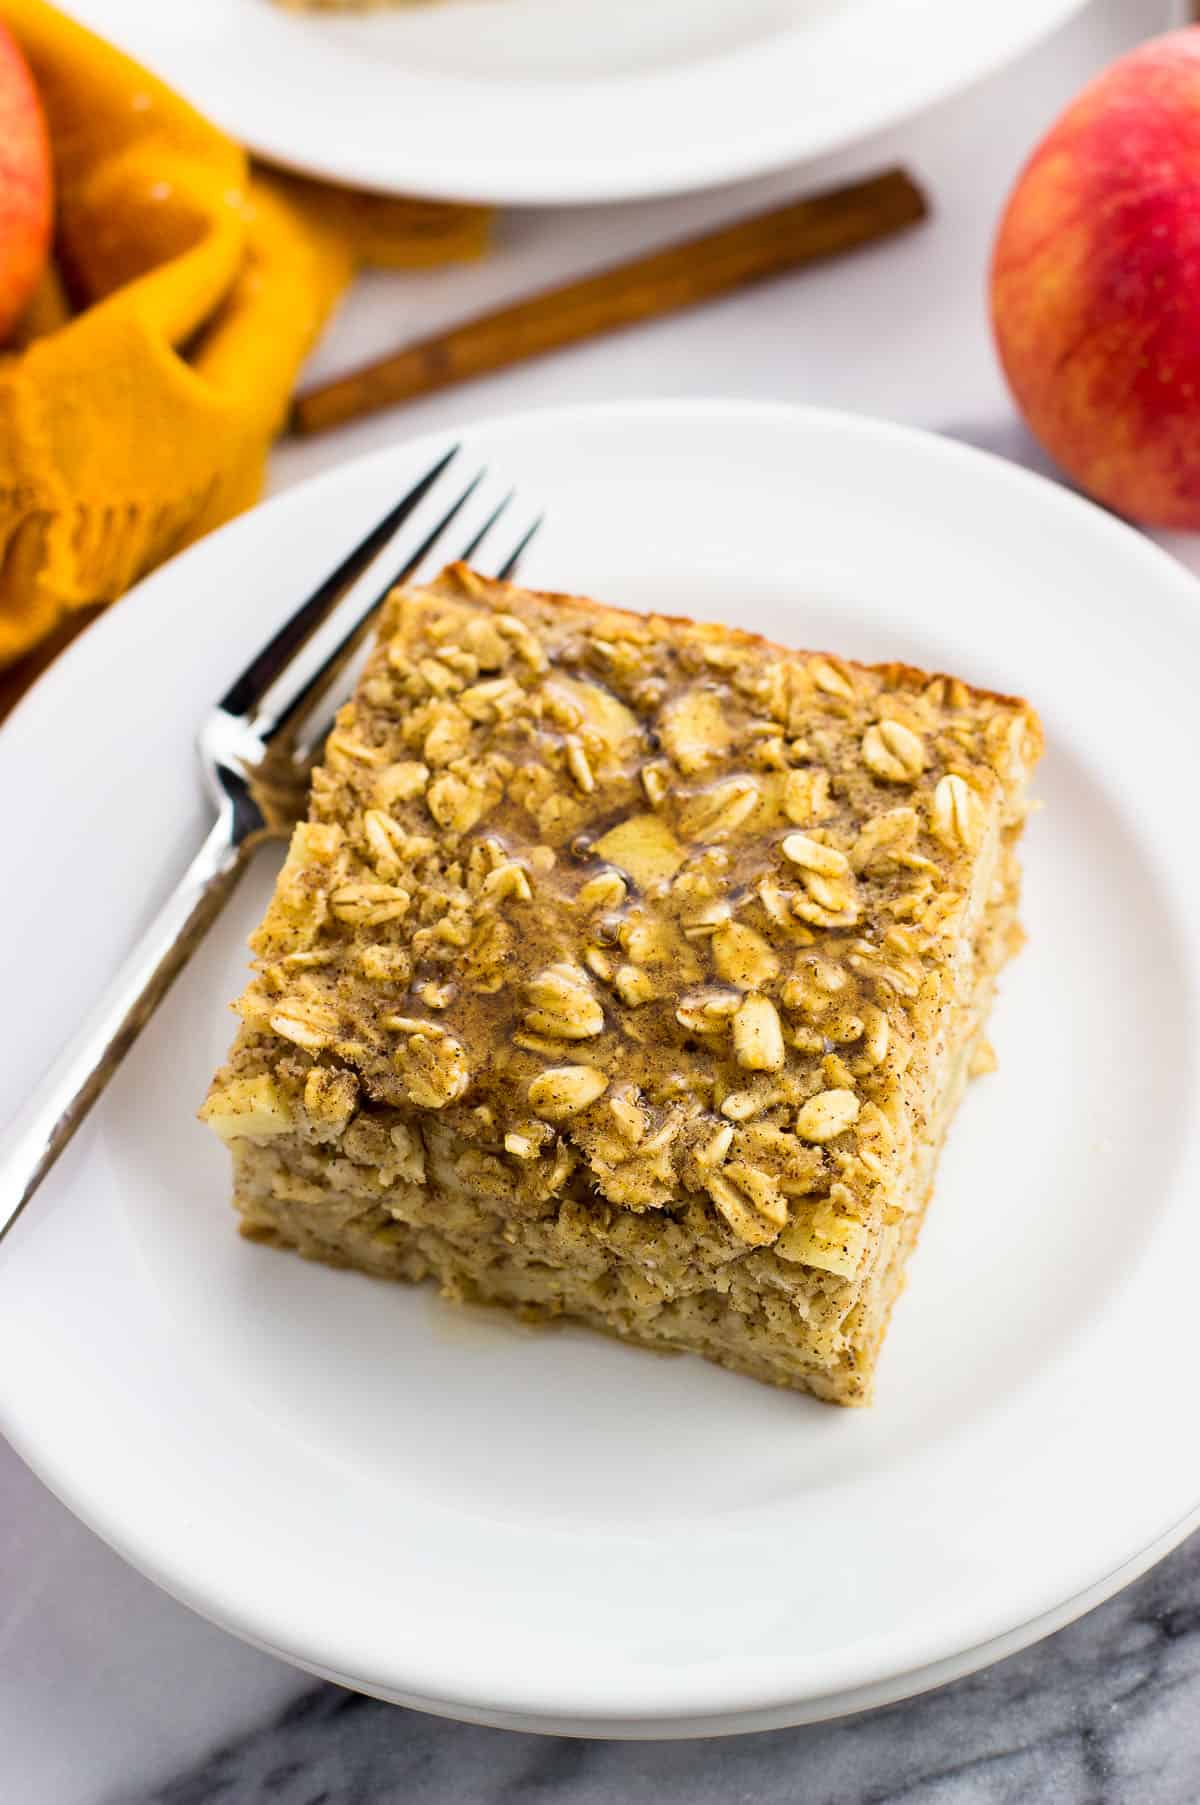 A piece of baked oatmeal on a plate drizzled with maple syrup with a fork.